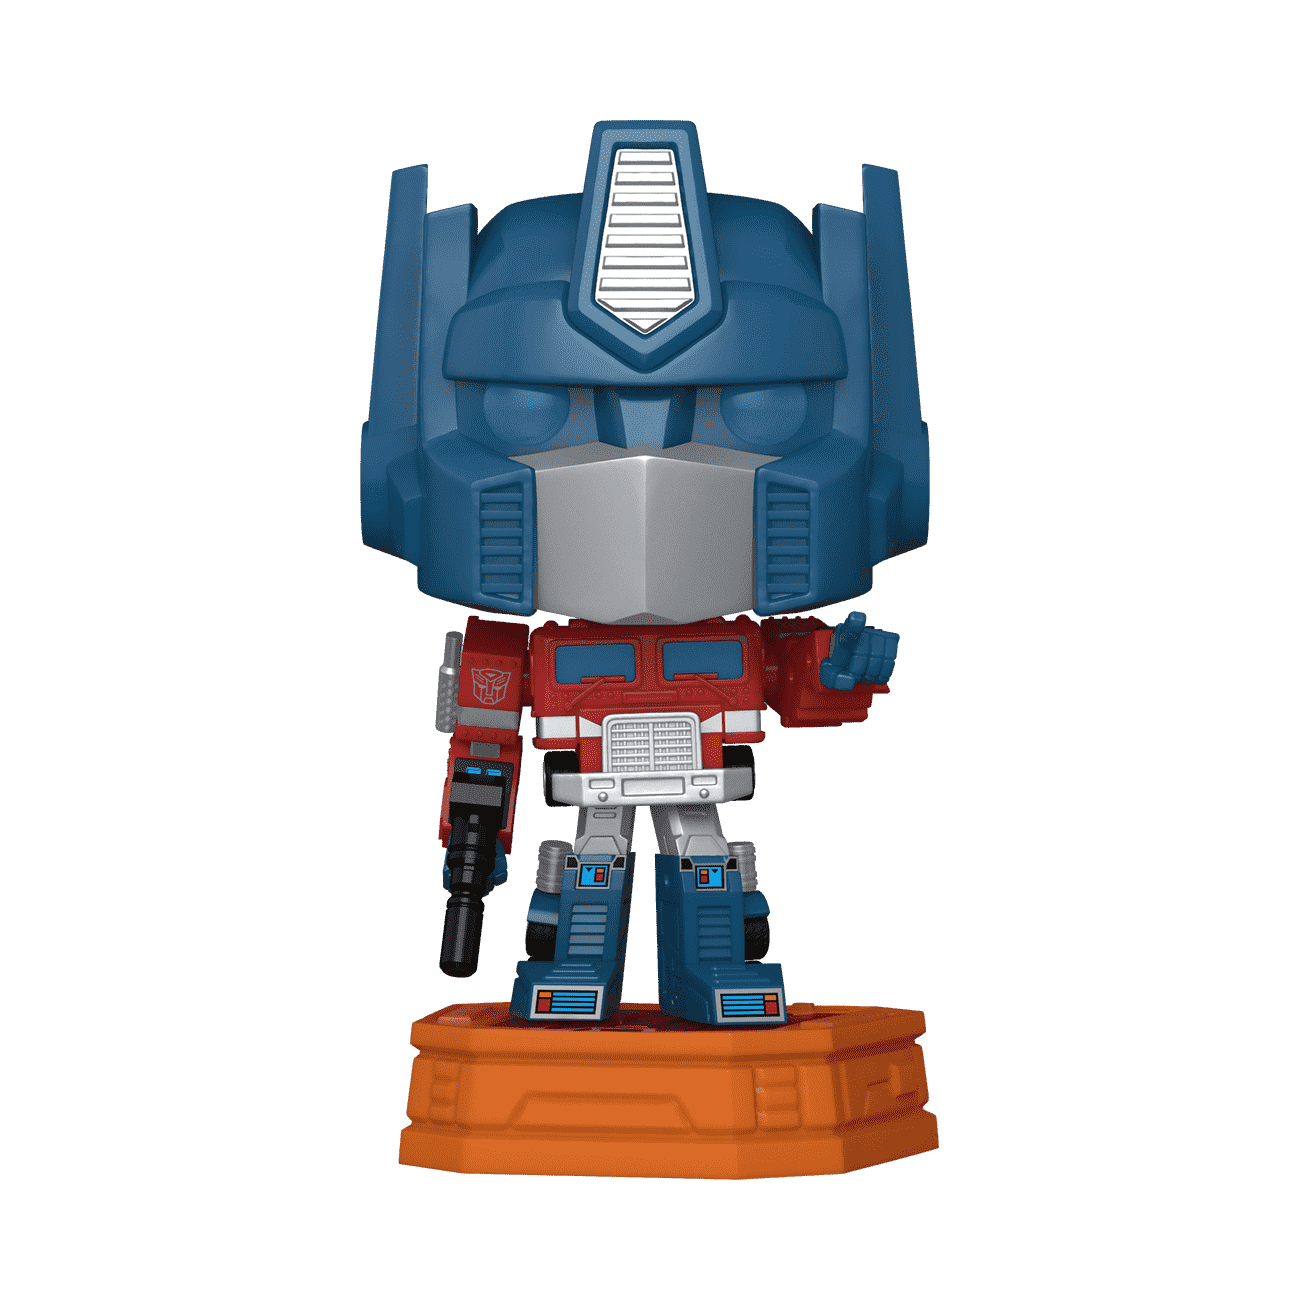 Buy Pop! Lights and Sounds Optimus Prime at Funko.